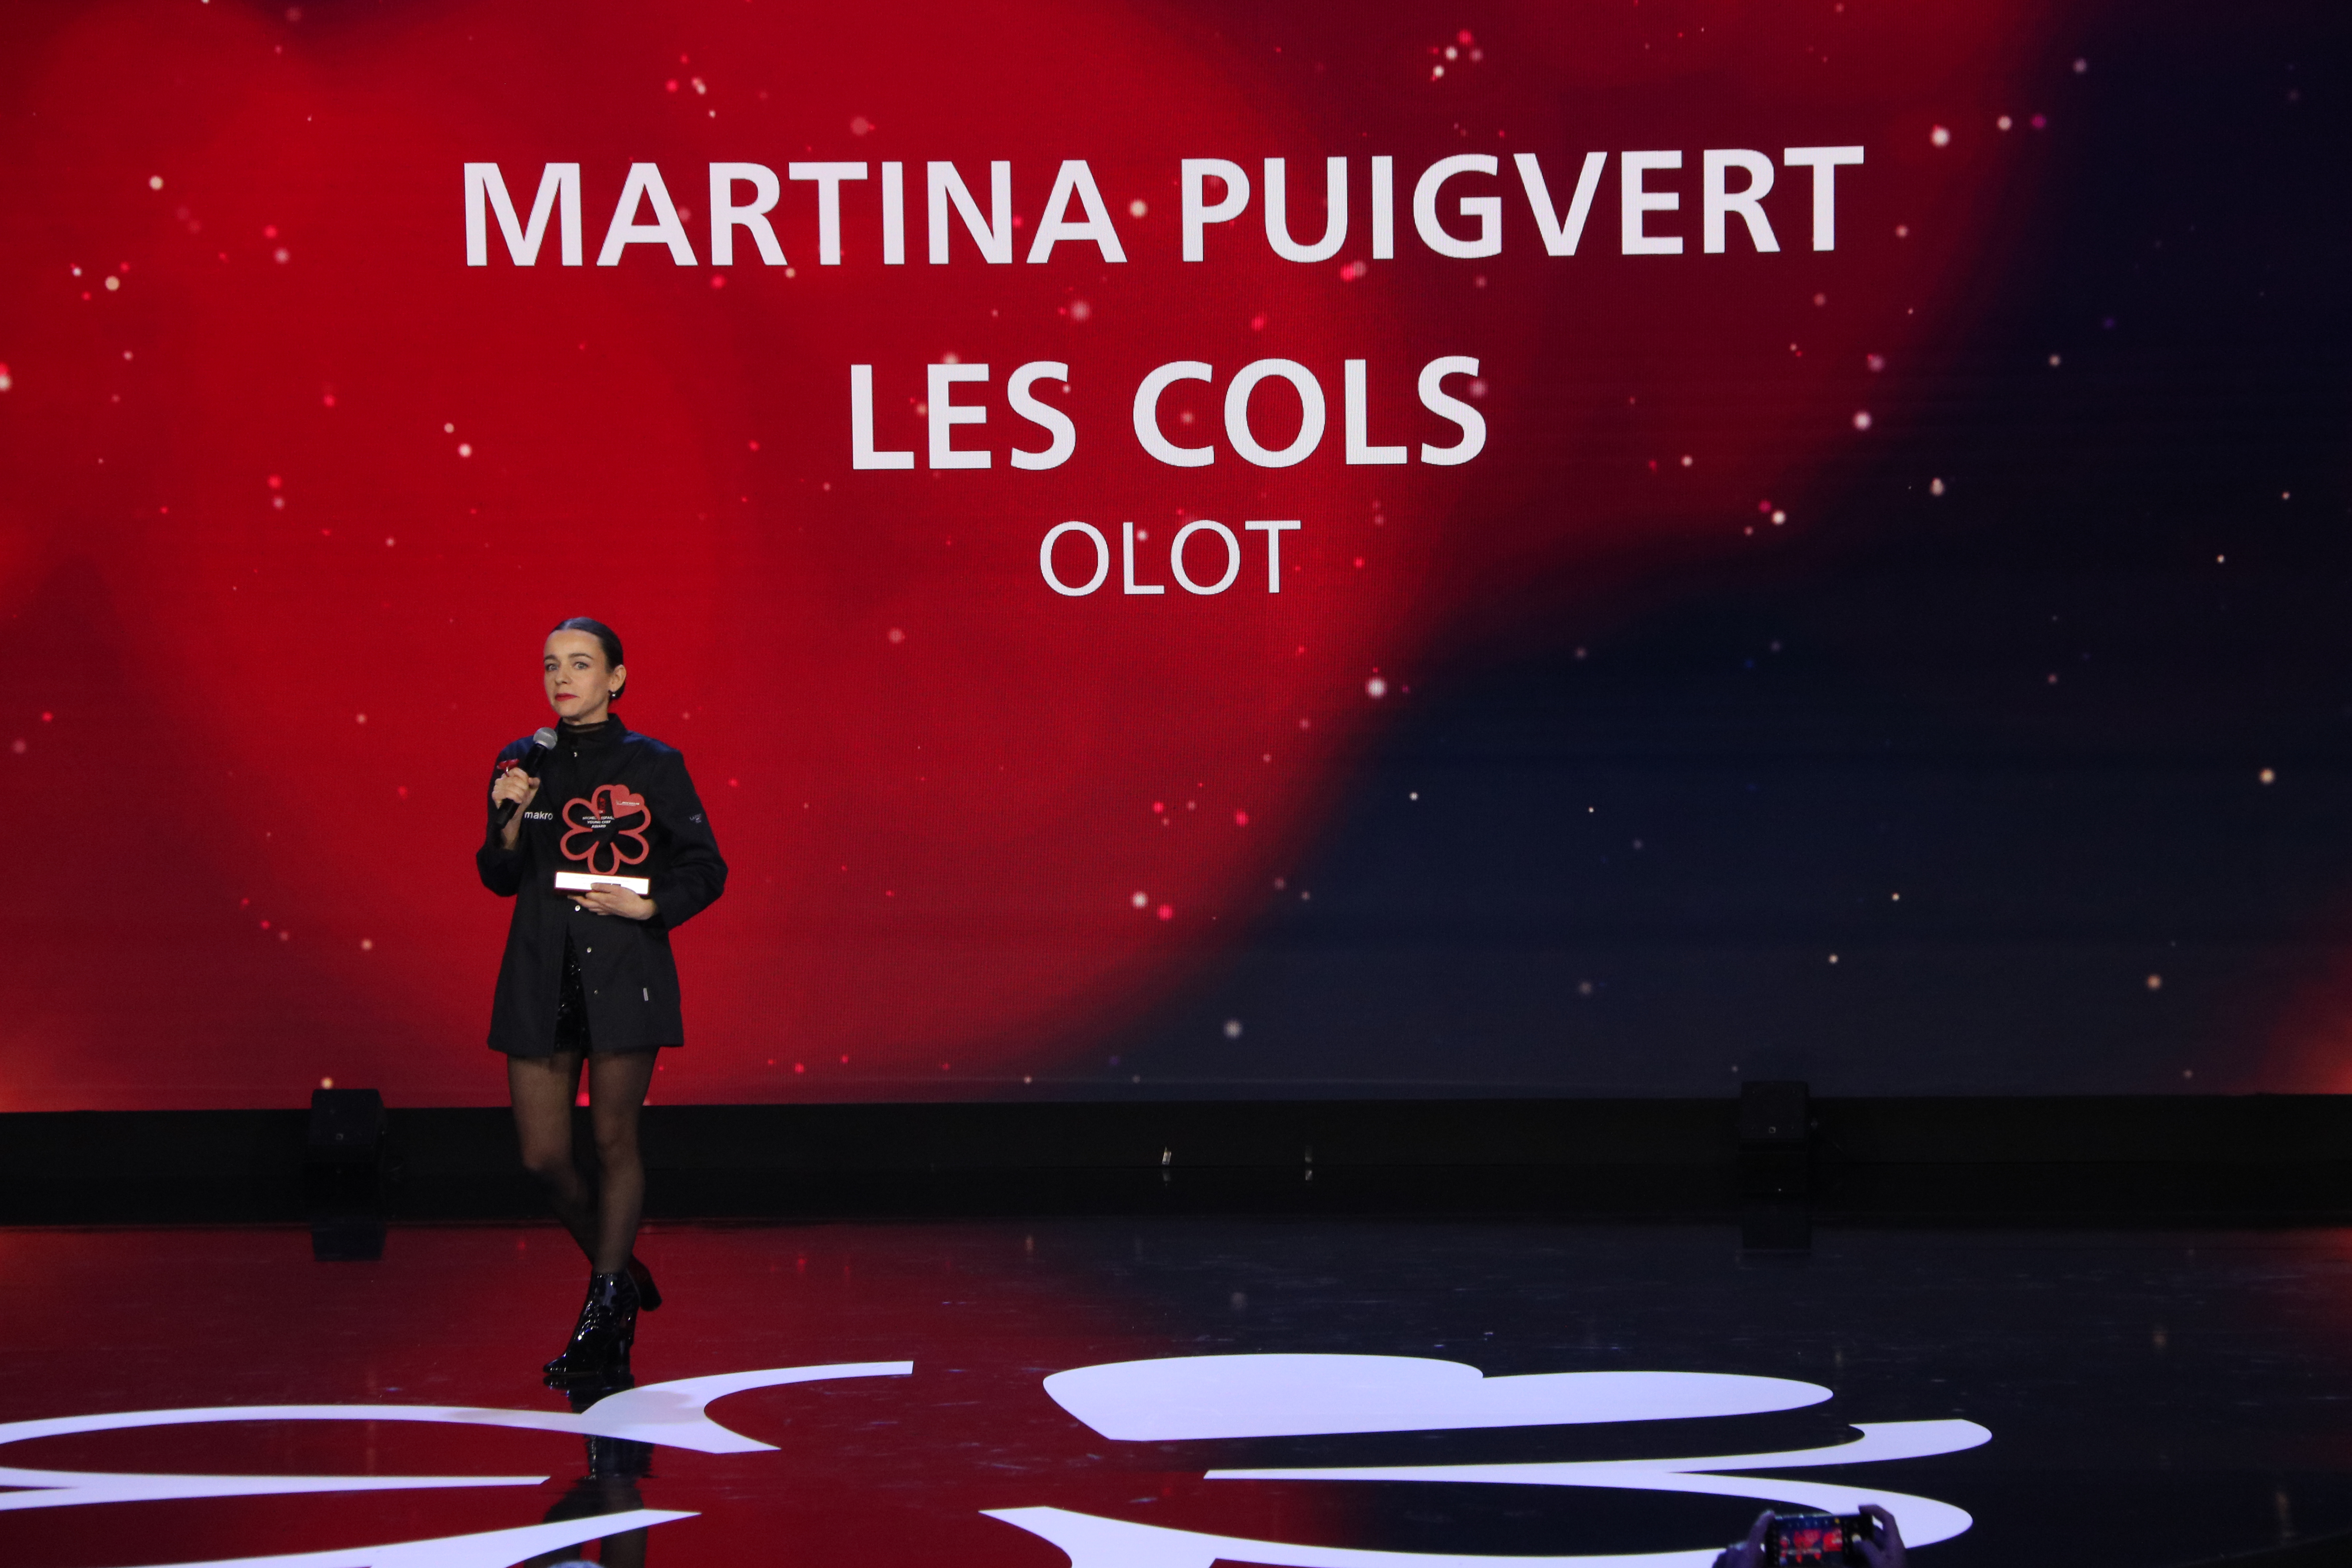 Martina Puigvert from Les Cols in Olot, winner of the best young chef at the Michelin gala in Barcelona